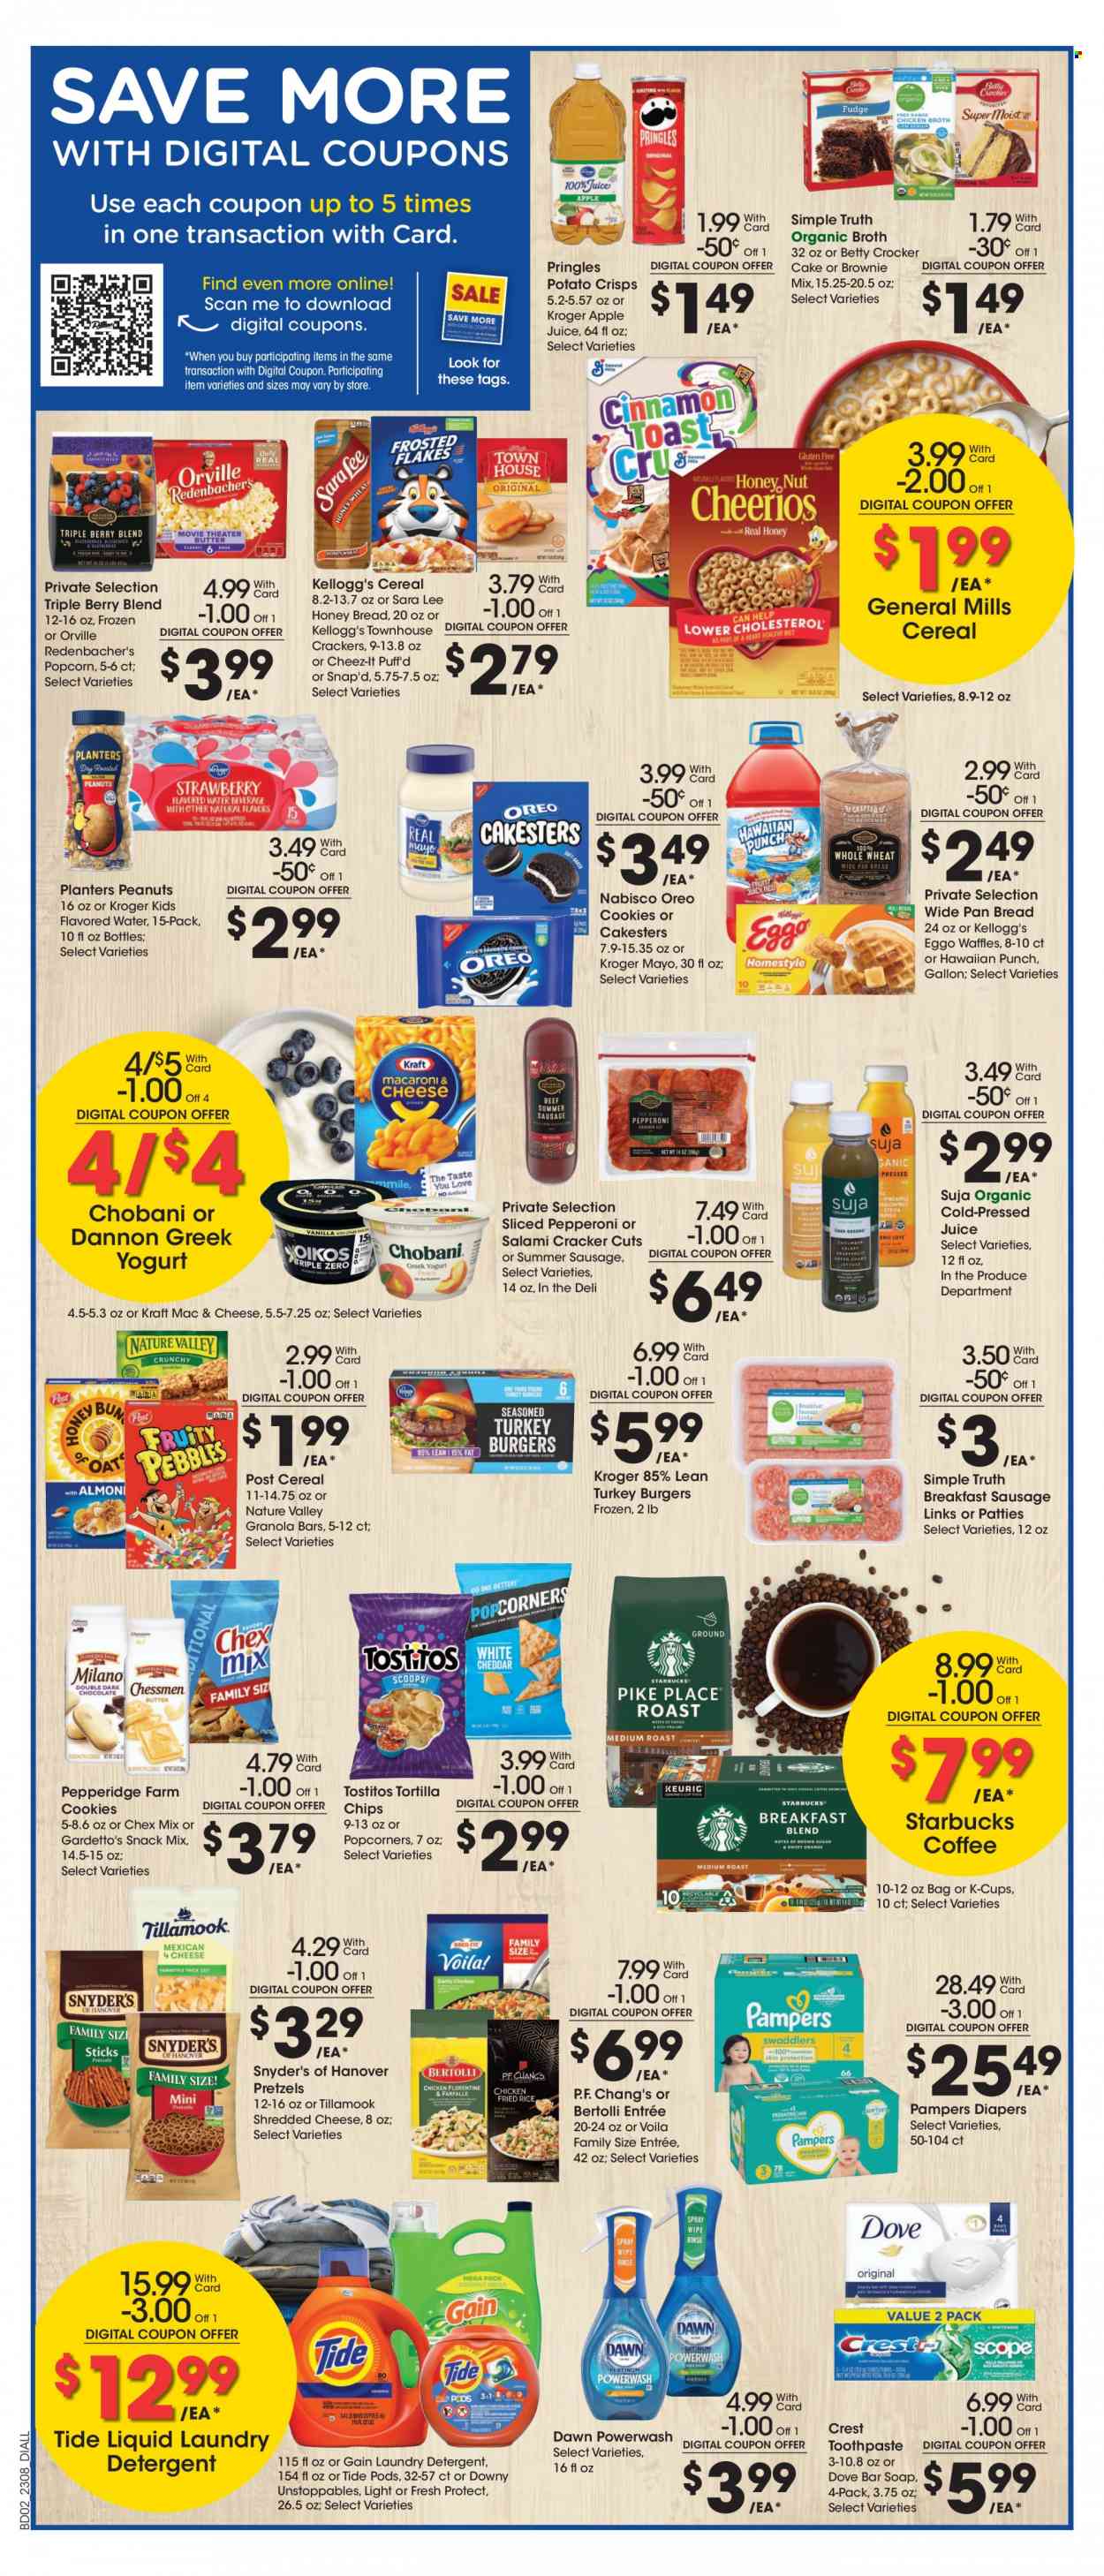 thumbnail - Dillons Flyer - 03/22/2023 - 03/28/2023 - Sales products - pretzels, cake, Sara Lee, brownie mix, hamburger, Kraft®, Bertolli, salami, sausage, summer sausage, pepperoni, shredded cheese, greek yoghurt, Oreo, yoghurt, Chobani, Dannon, cookies, Dove, snack, crackers, Kellogg's, tortilla chips, potato crisps, Pringles, popcorn, Cheez-It, Tostitos, Chex Mix, broth, cereals, granola bar, Nature Valley, honey, peanuts, Planters, apple juice, juice, flavored water, water, coffee, Starbucks, coffee capsules, K-Cups, turkey burger, Pampers, nappies, detergent, Gain, Tide, laundry detergent, soap bar, soap, toothpaste, Crest, pan. Page 6.